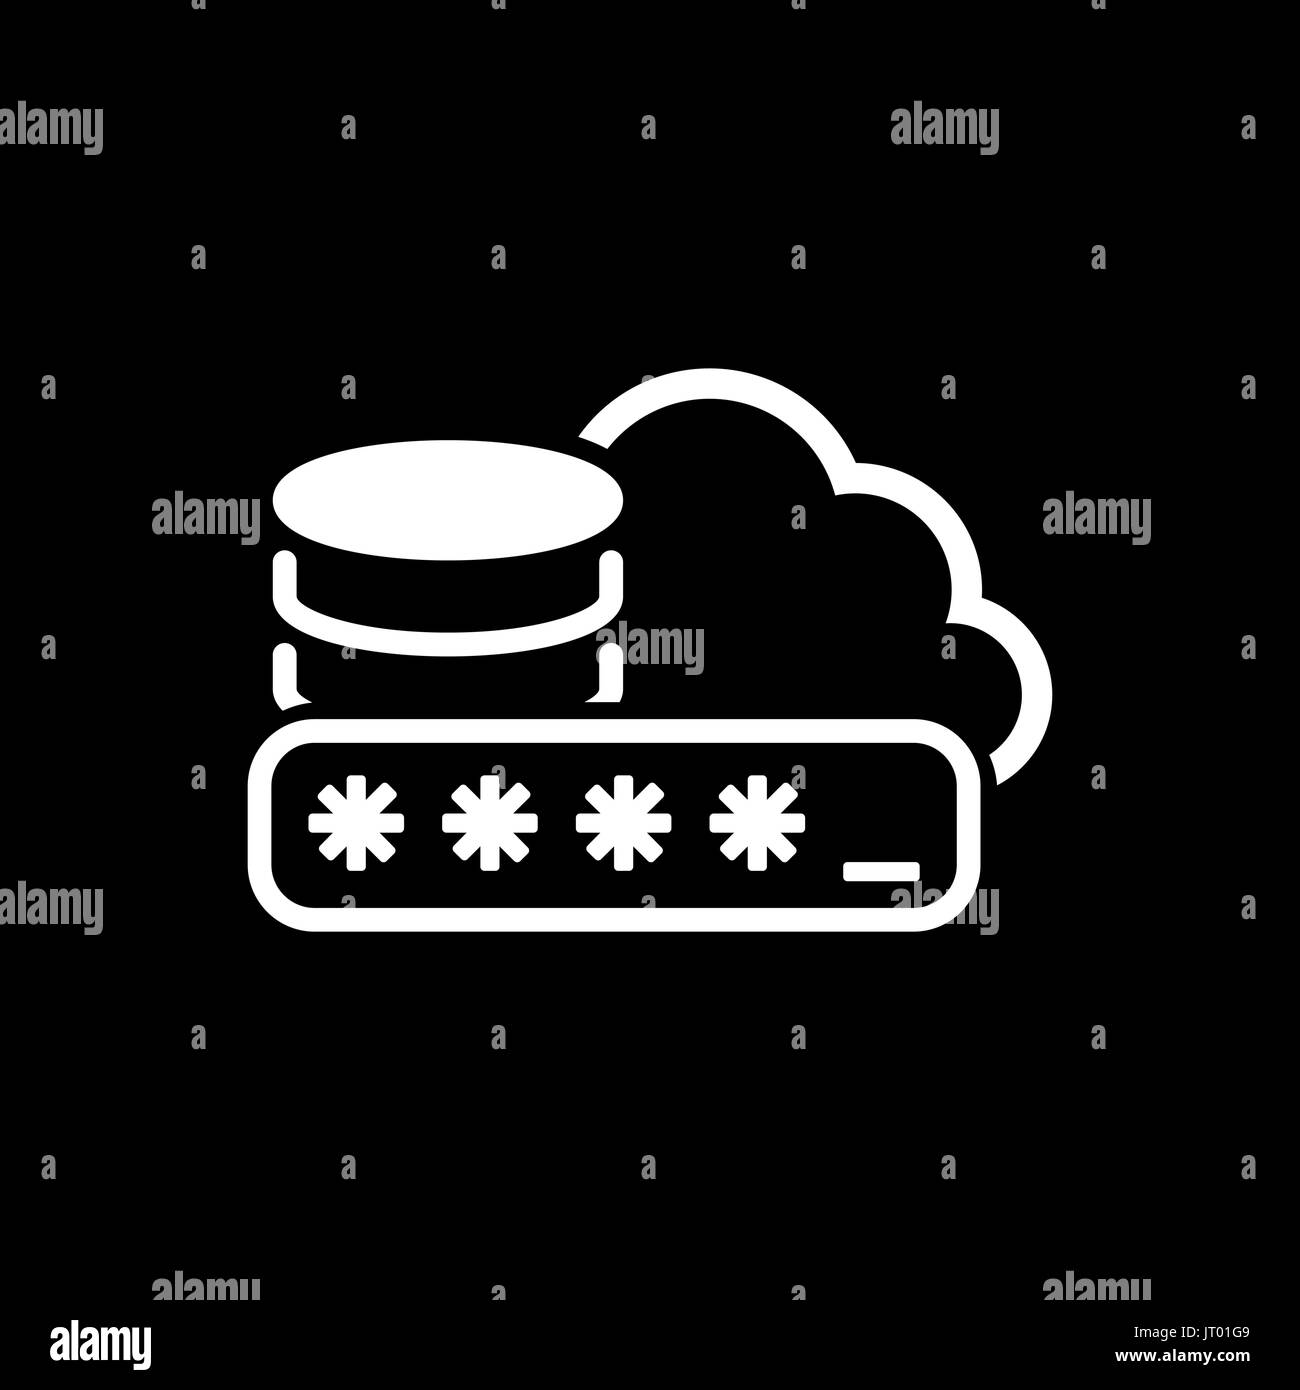 Secure Cloud Storage Icon. Flat Design. Stock Vector